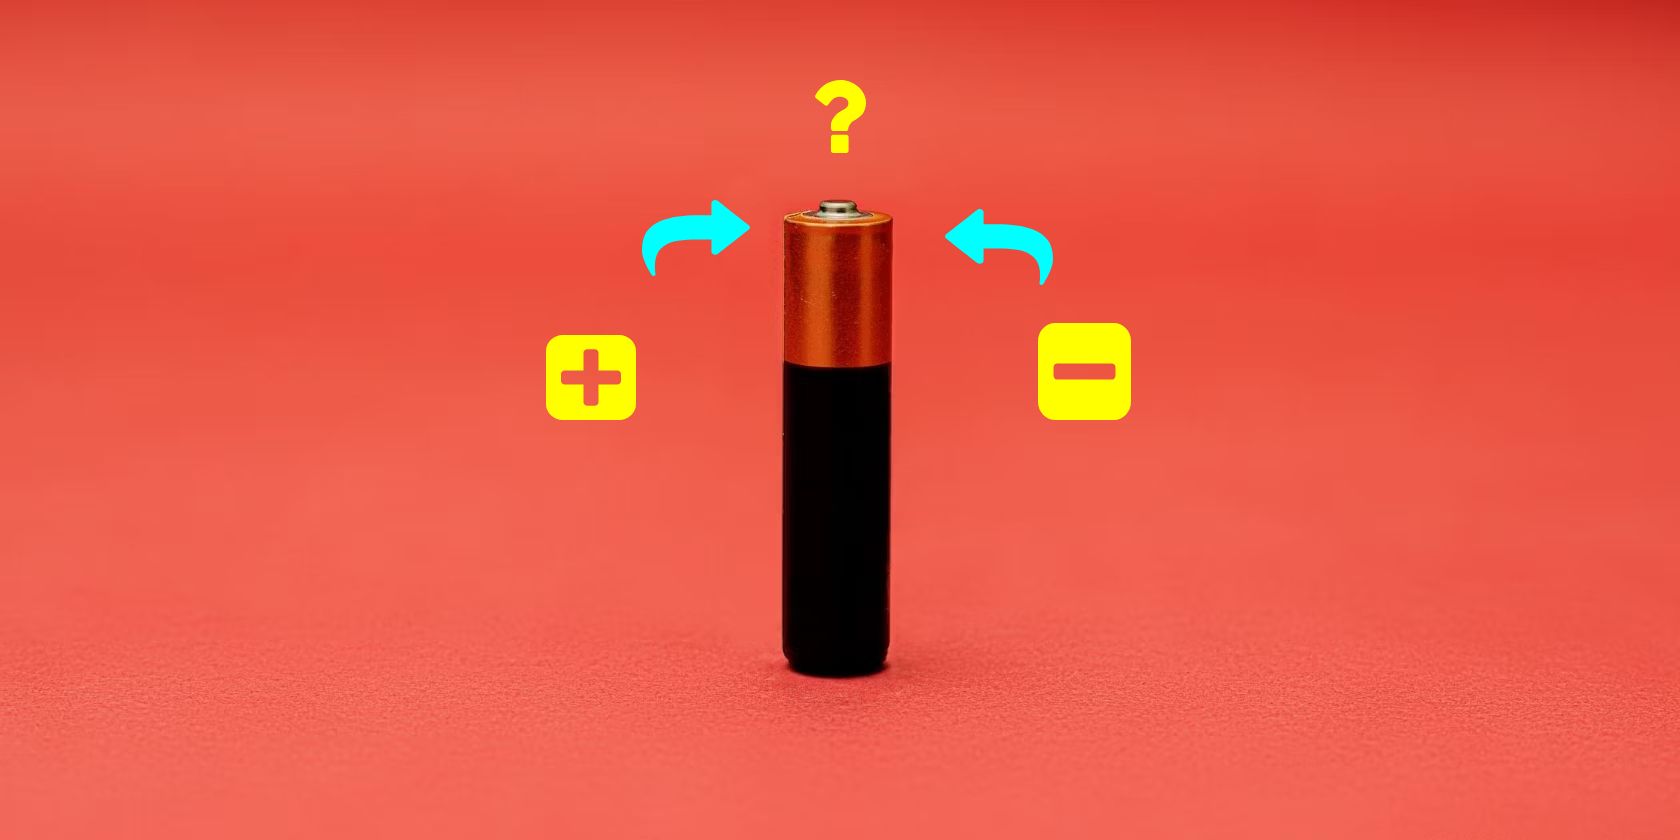 battery with plus and minus symbols pointing to it